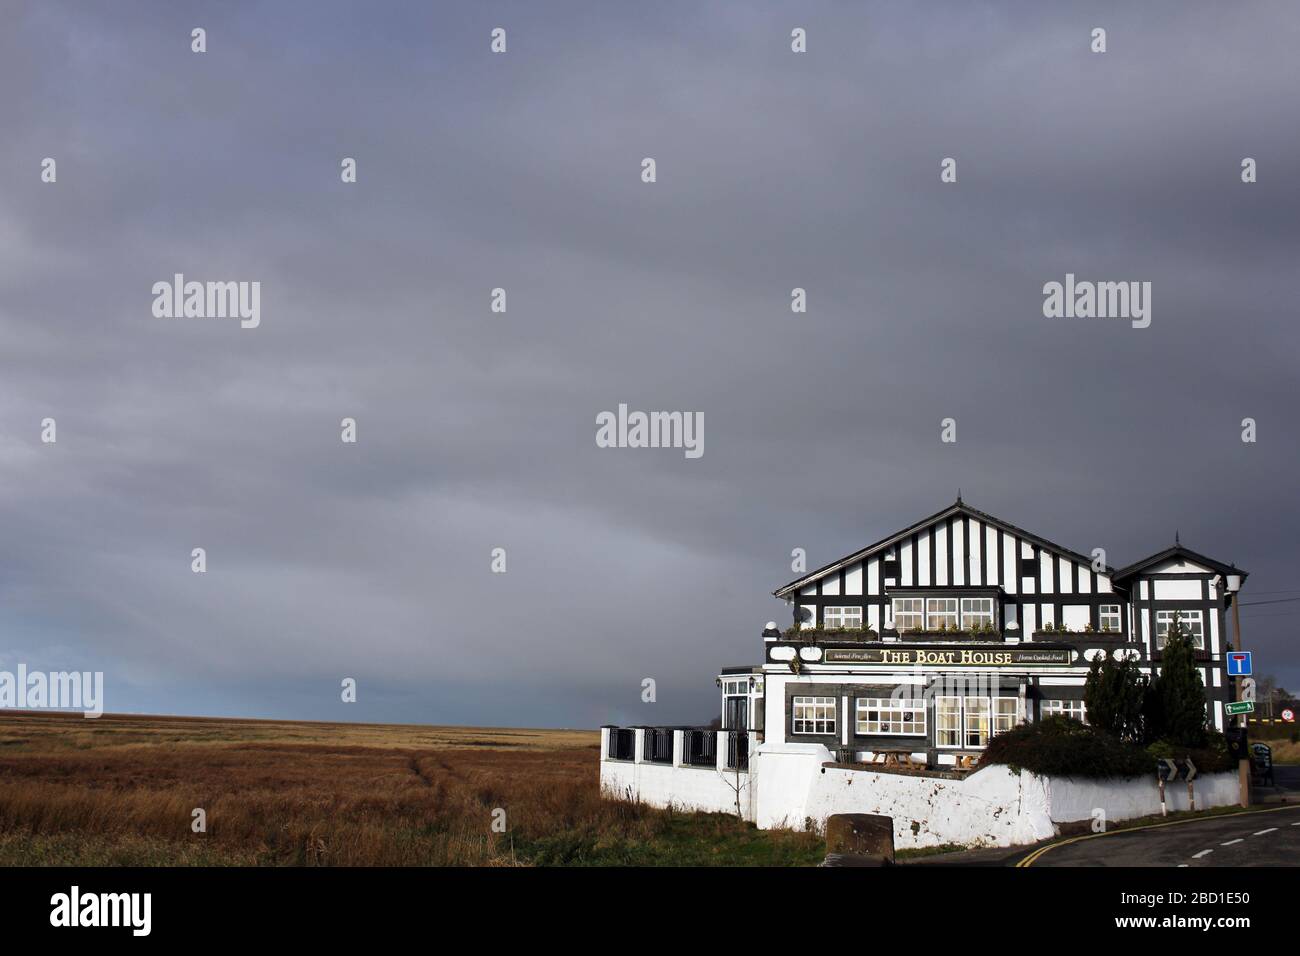 The Boat House Pub amid stormy skies sits on the edge of Parkgate Marsh/Gayton Sands RSPB, Dee Estuary, Parkgate, Wirral, UK Stock Photo